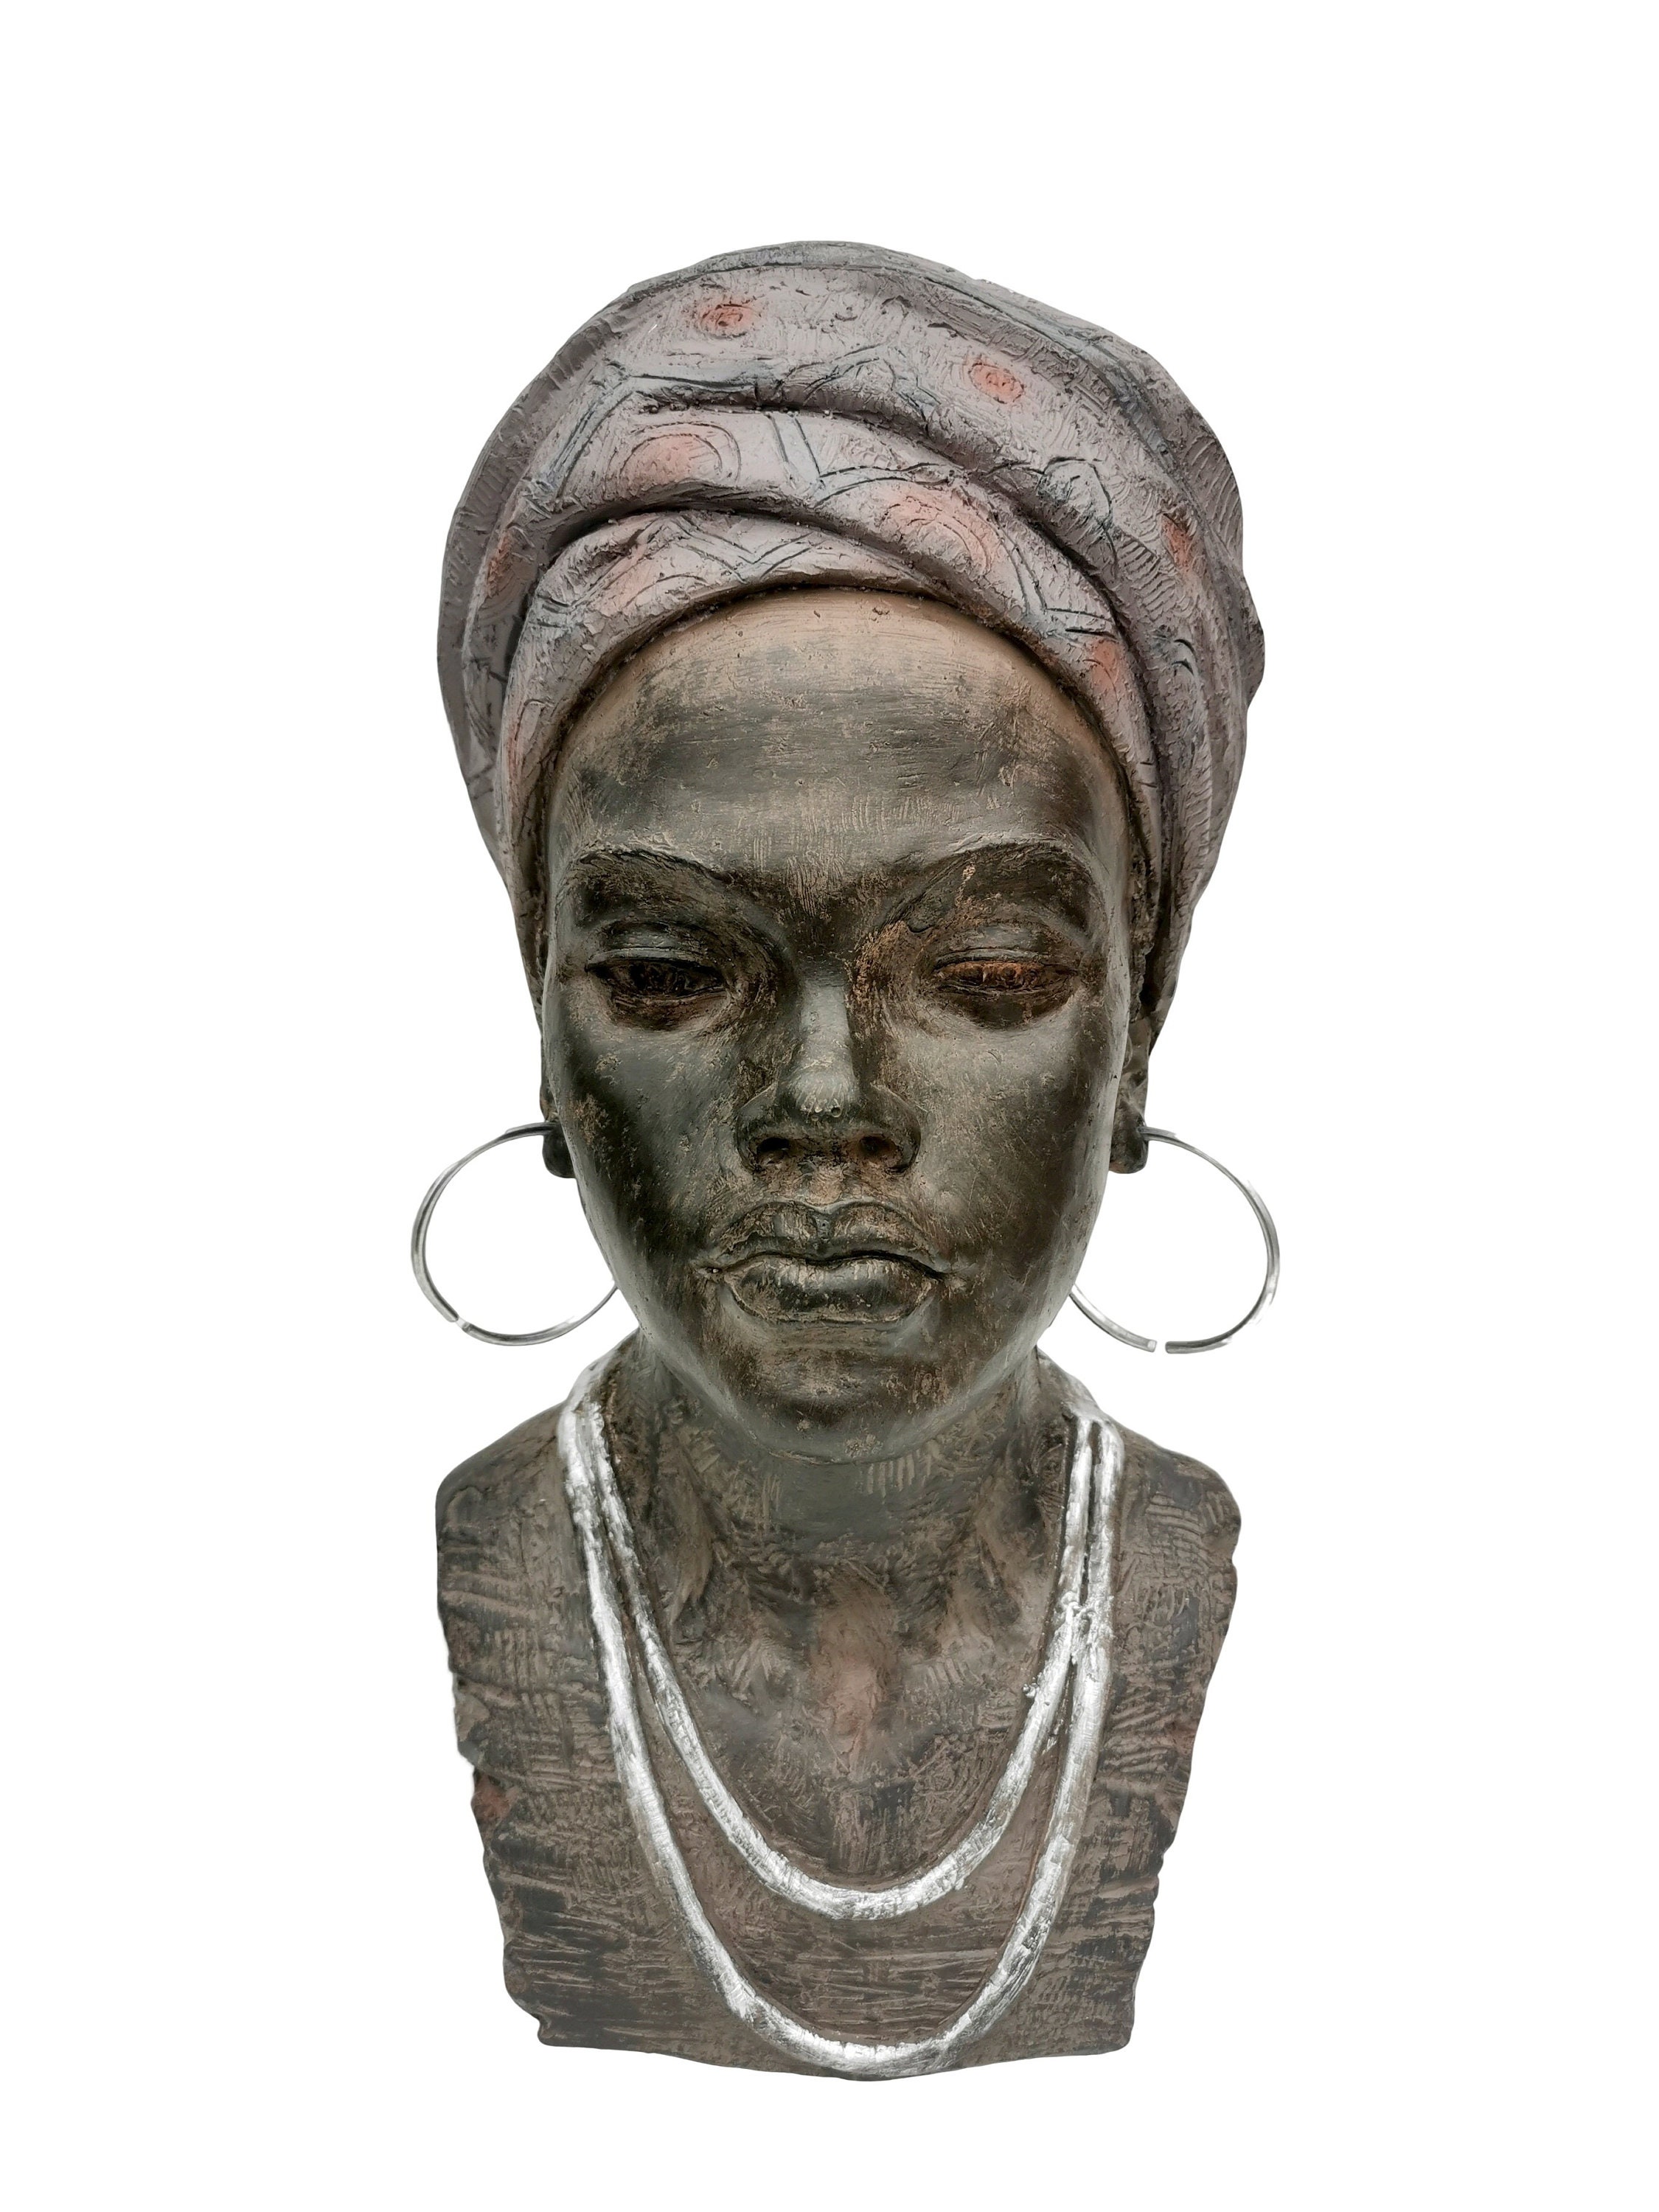 Beautiful bust of an African woman - Beautiful expression - Native decor